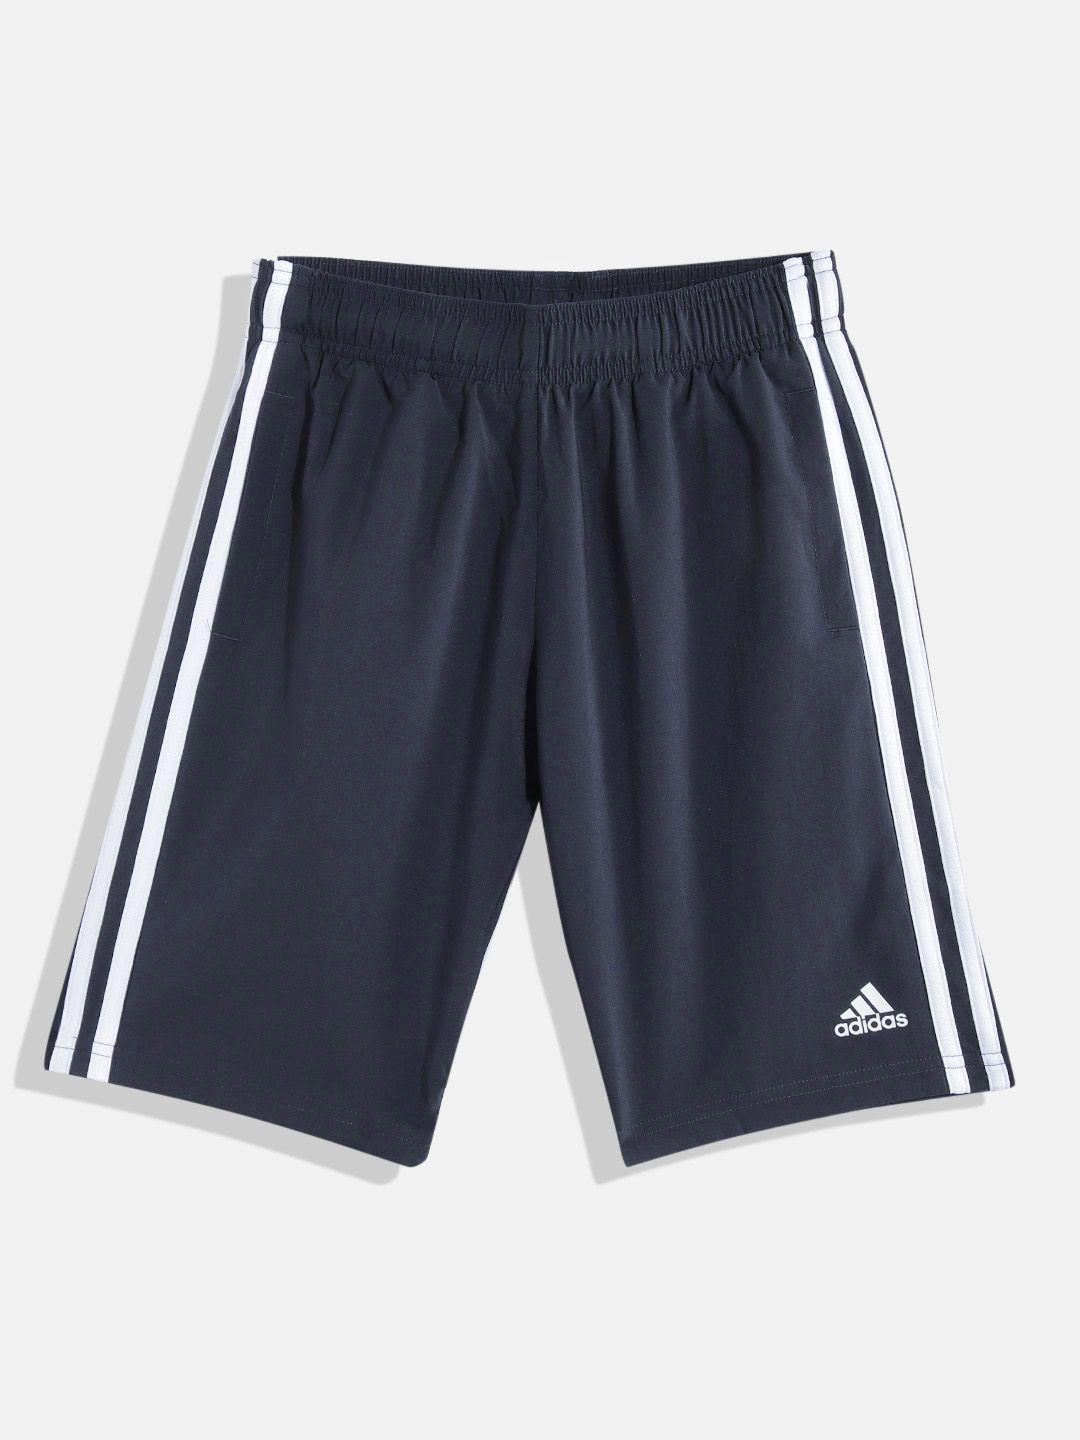 adidas kids 3s wn shorts with side taping detail